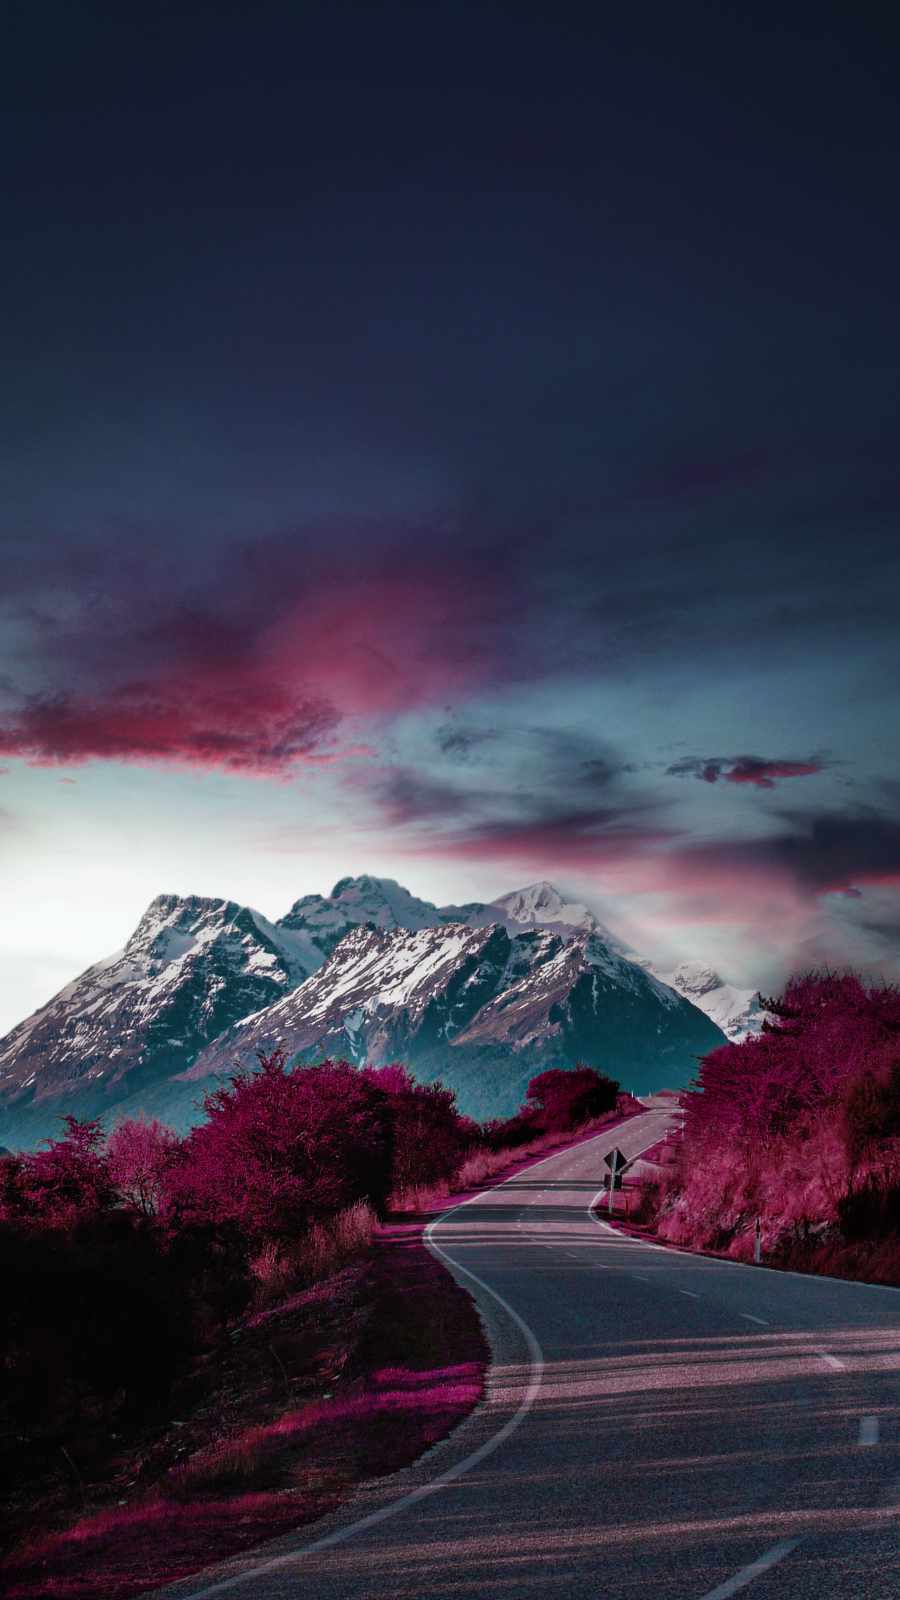 Mountain Road IPhone Wallpaper - IPhone Wallpapers : iPhone Wallpapers